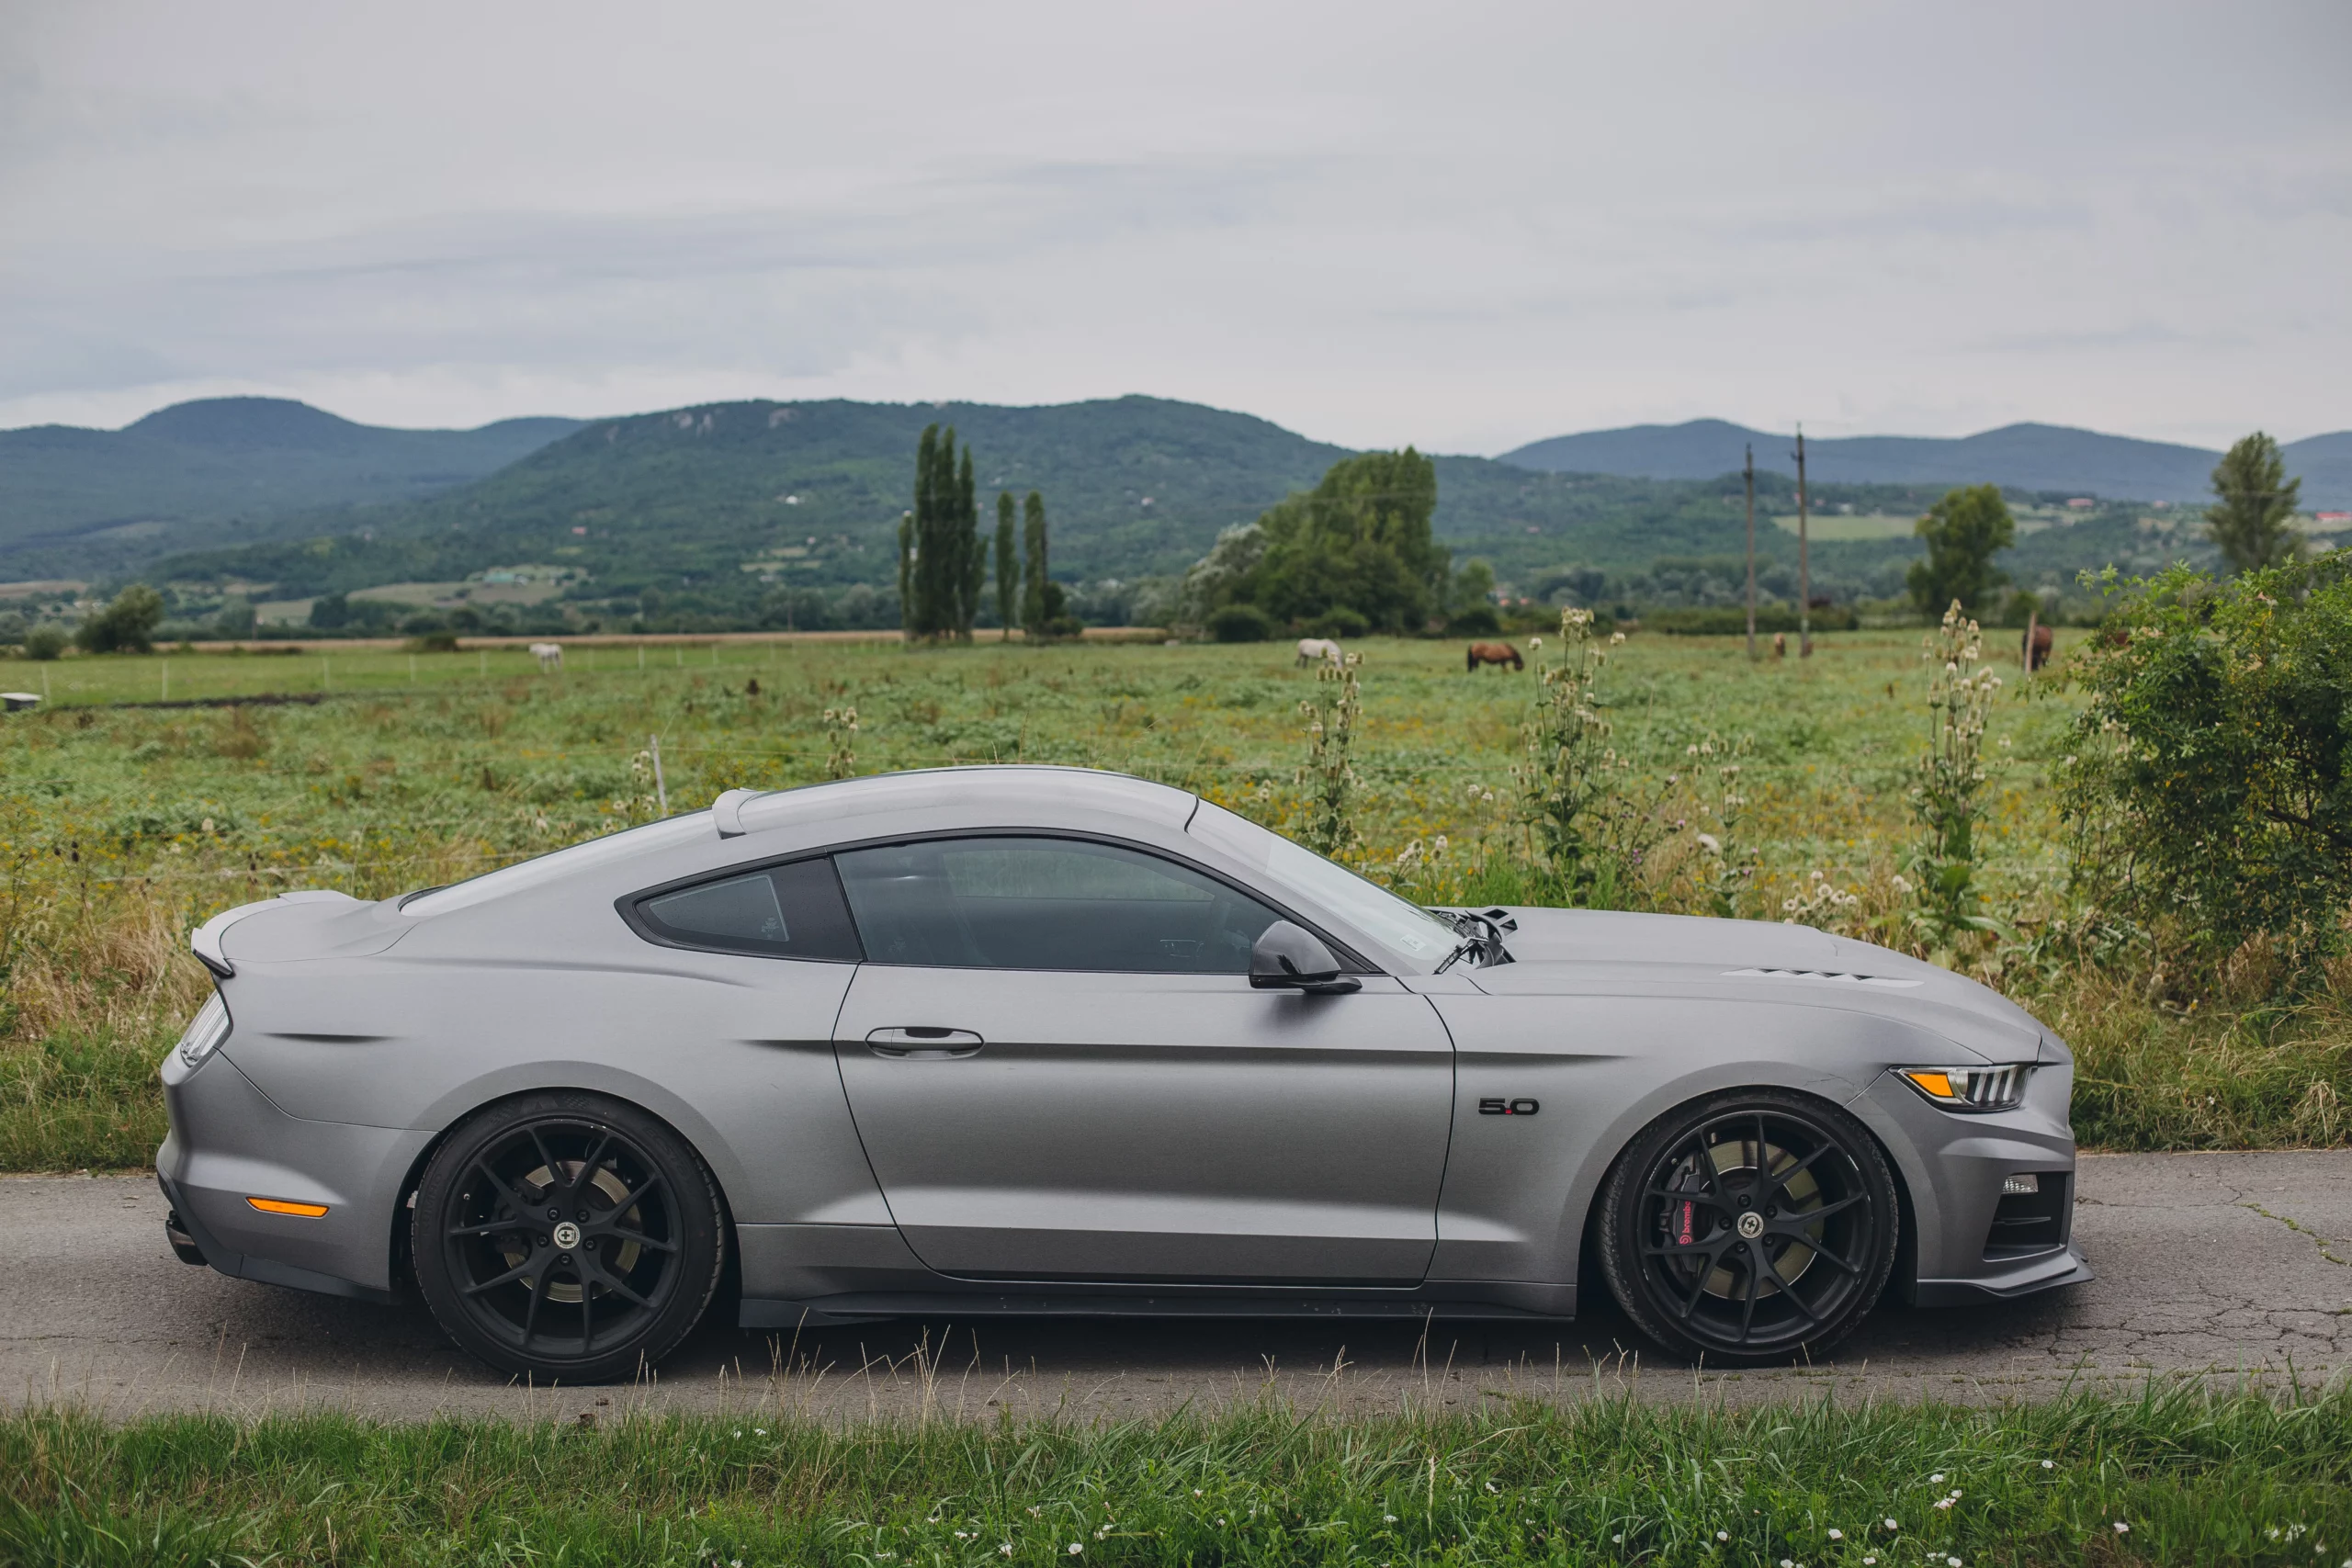 Ford Mustang 5.0 GT 2018